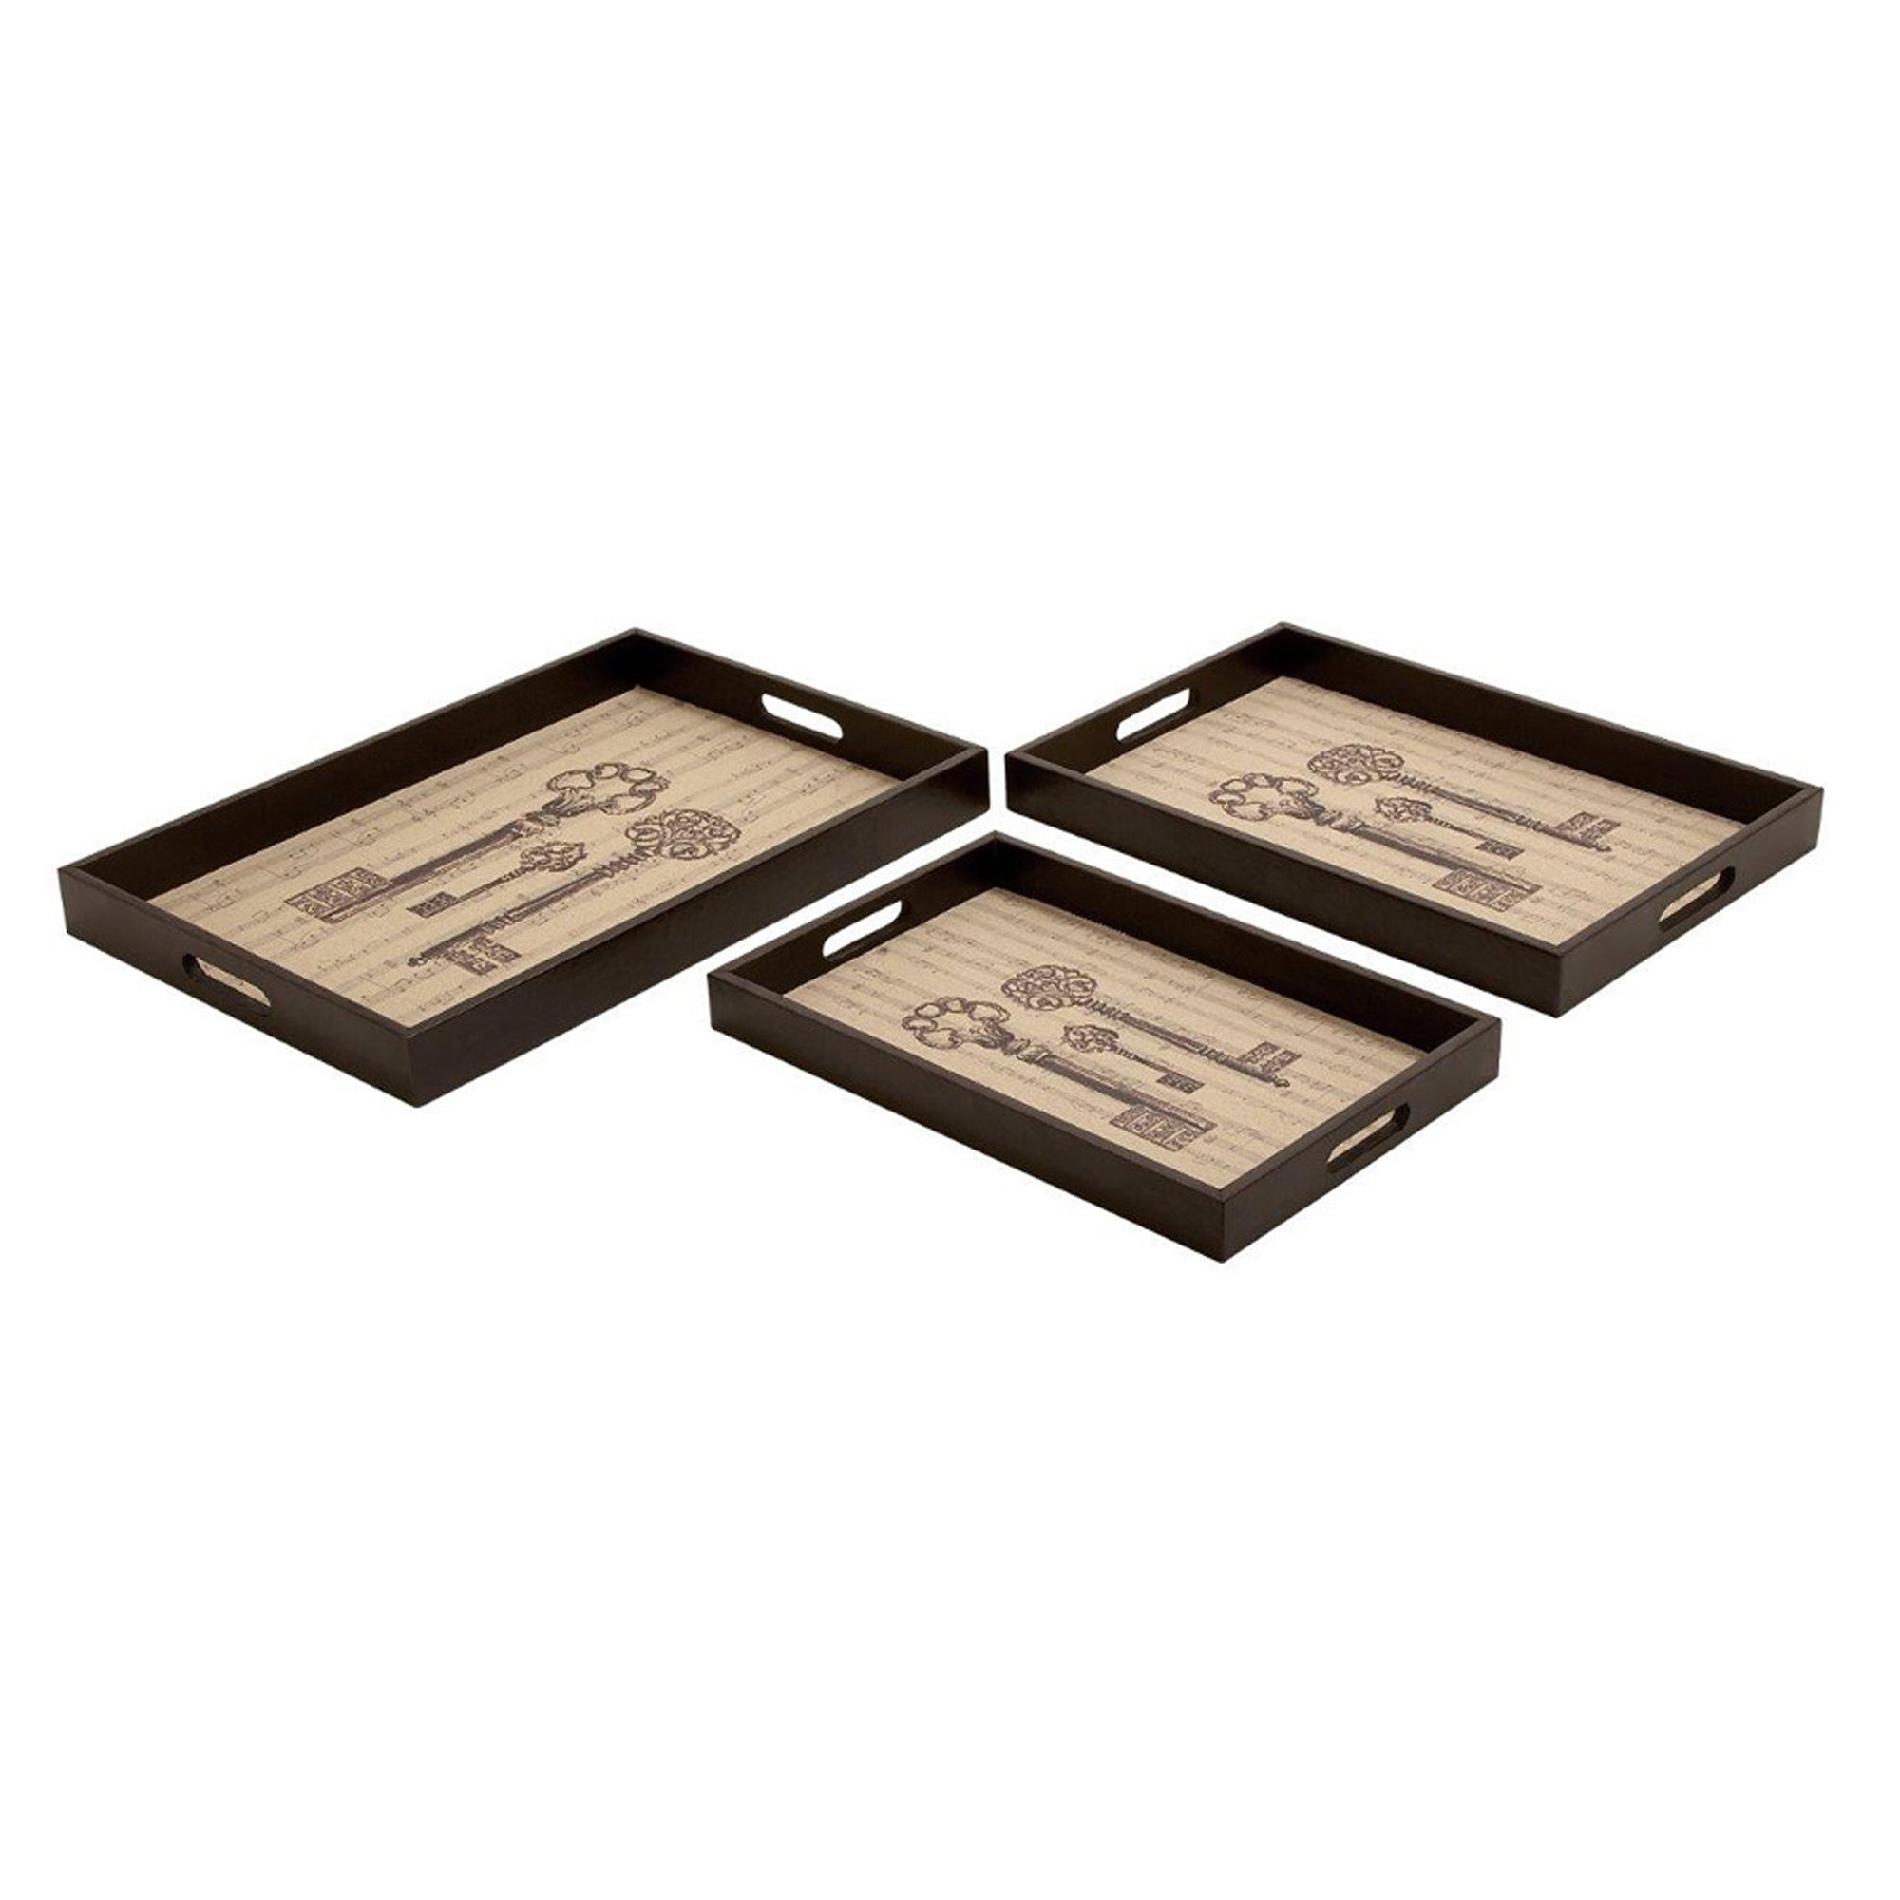 Ore International Wooden And Leather Keys Tray Set Of Three